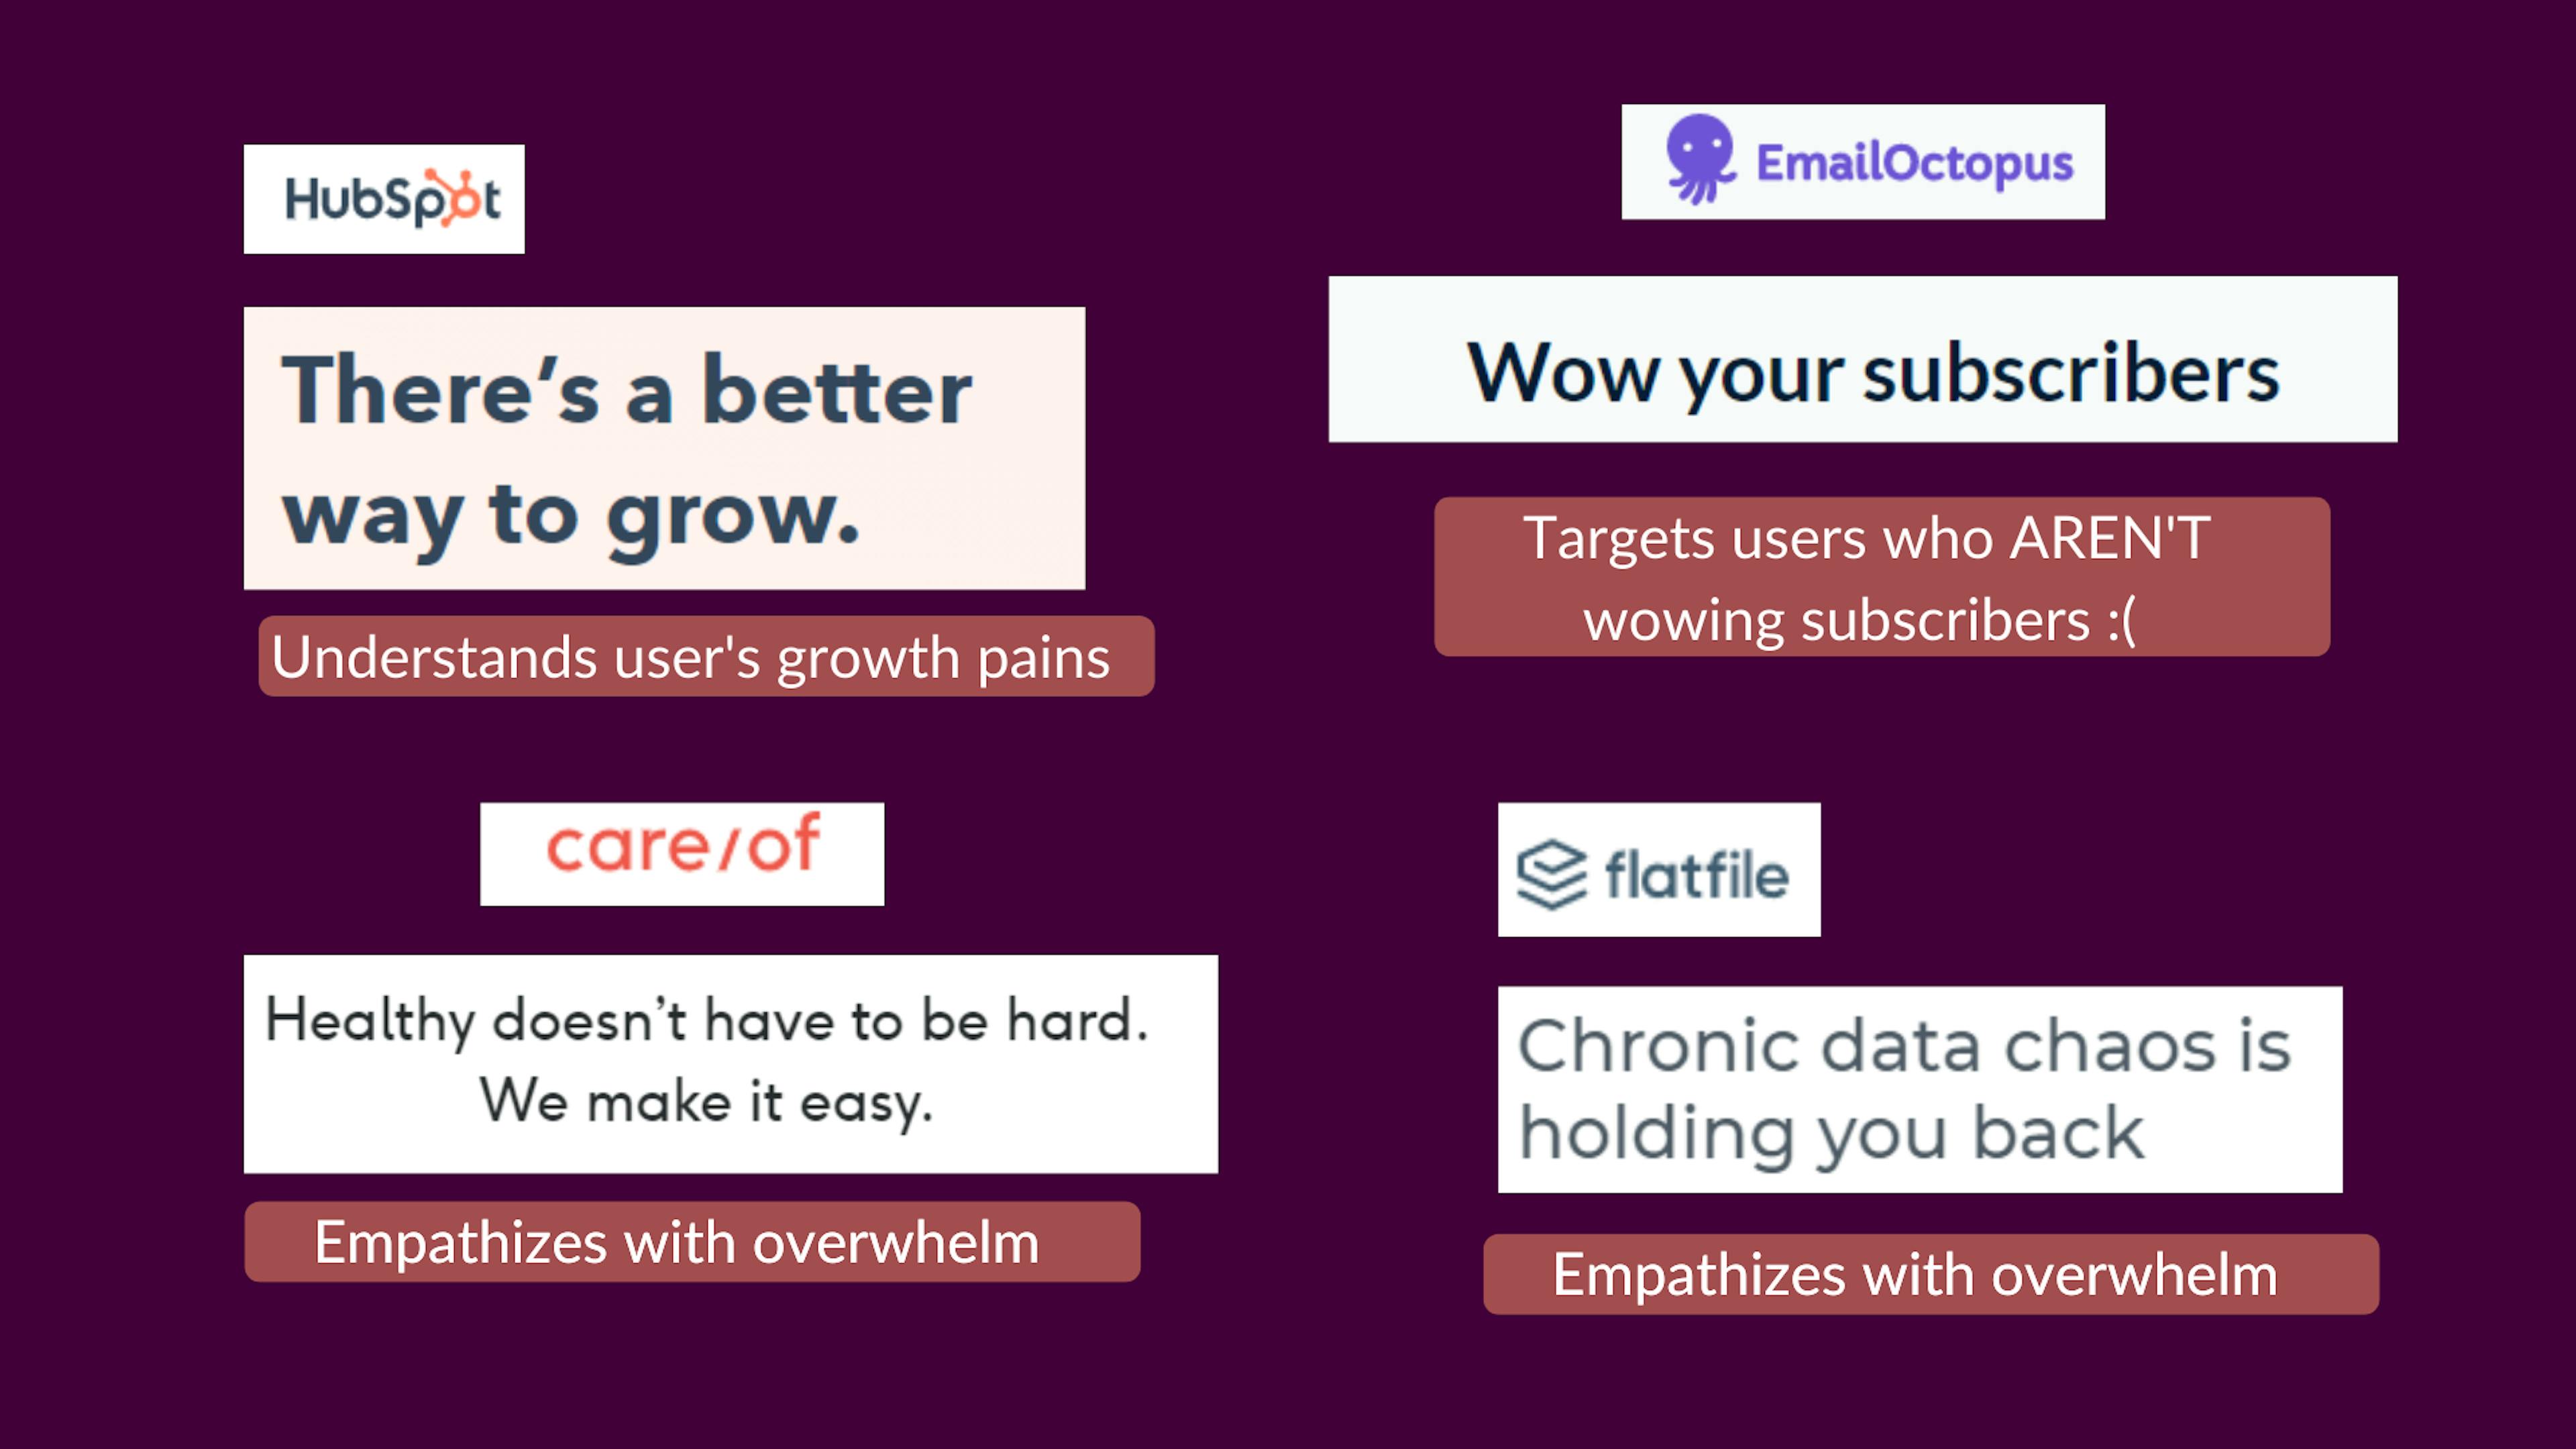 Knowing the pain points makes the copy way easier to write. And your landing page way more convincing.